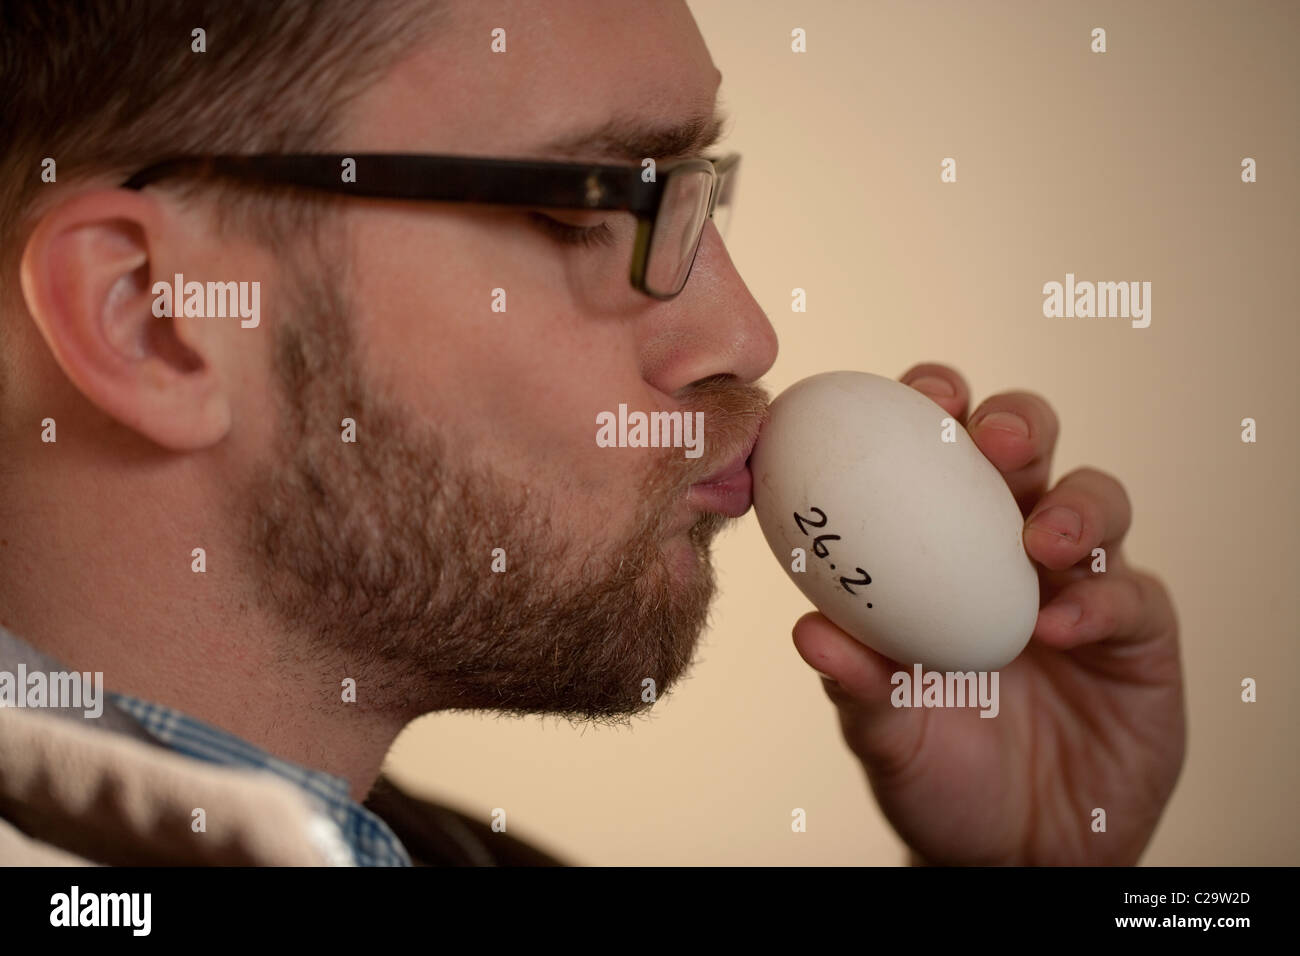 Aviculturist  sensing size of air space within a fertile egg, using his lips. Larger air space indicates near hatching. Stock Photo